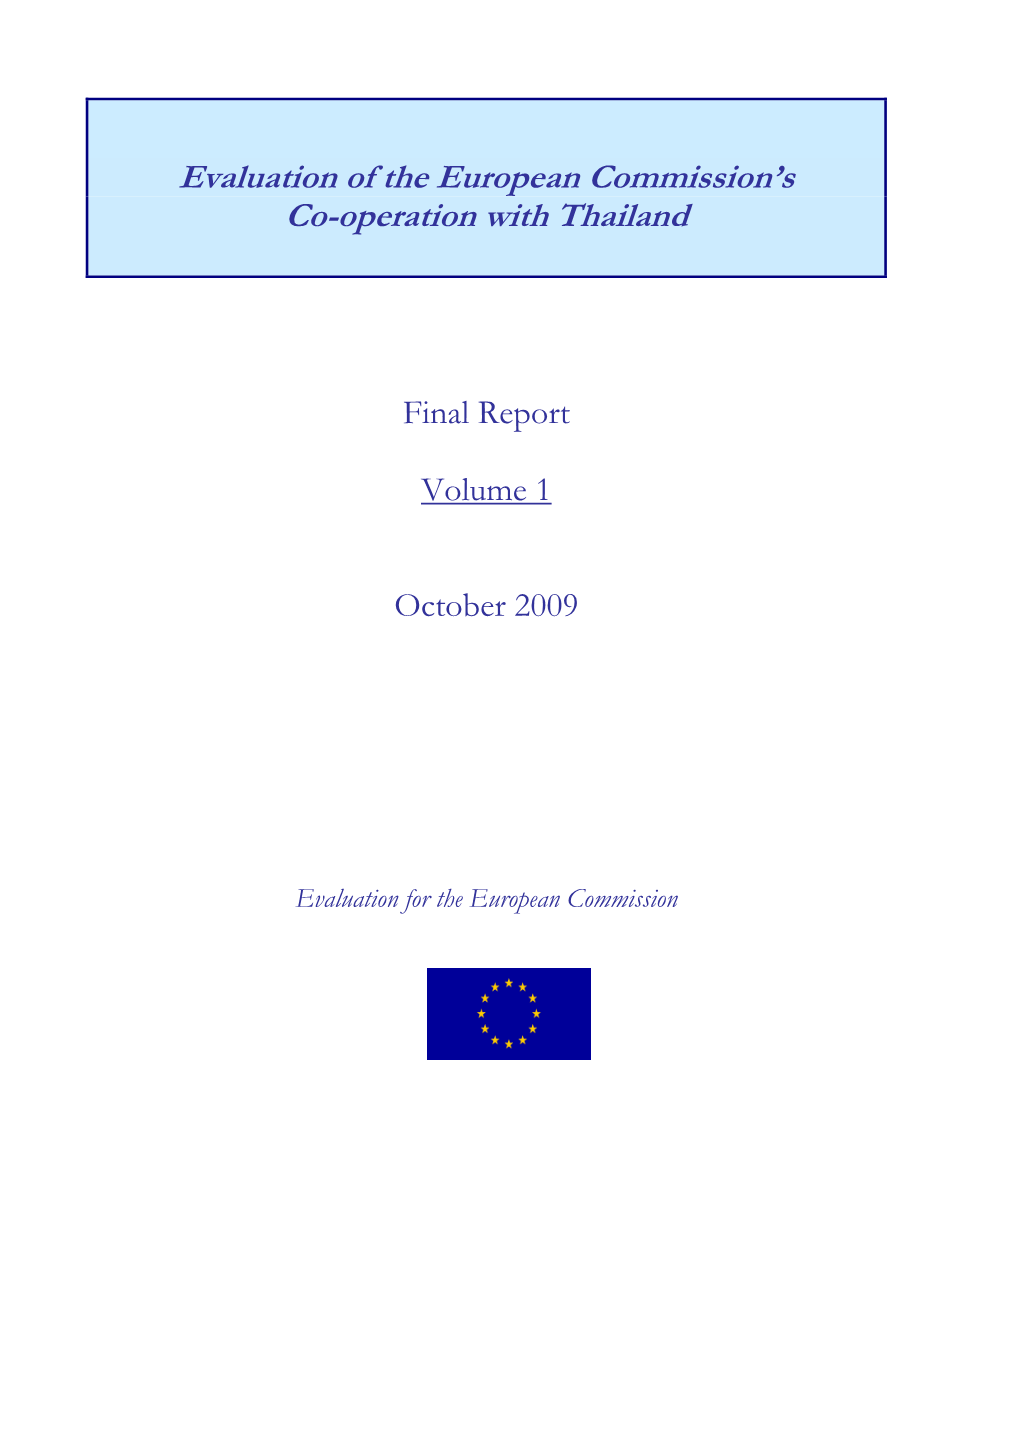 Evaluation of the European Commission's Co